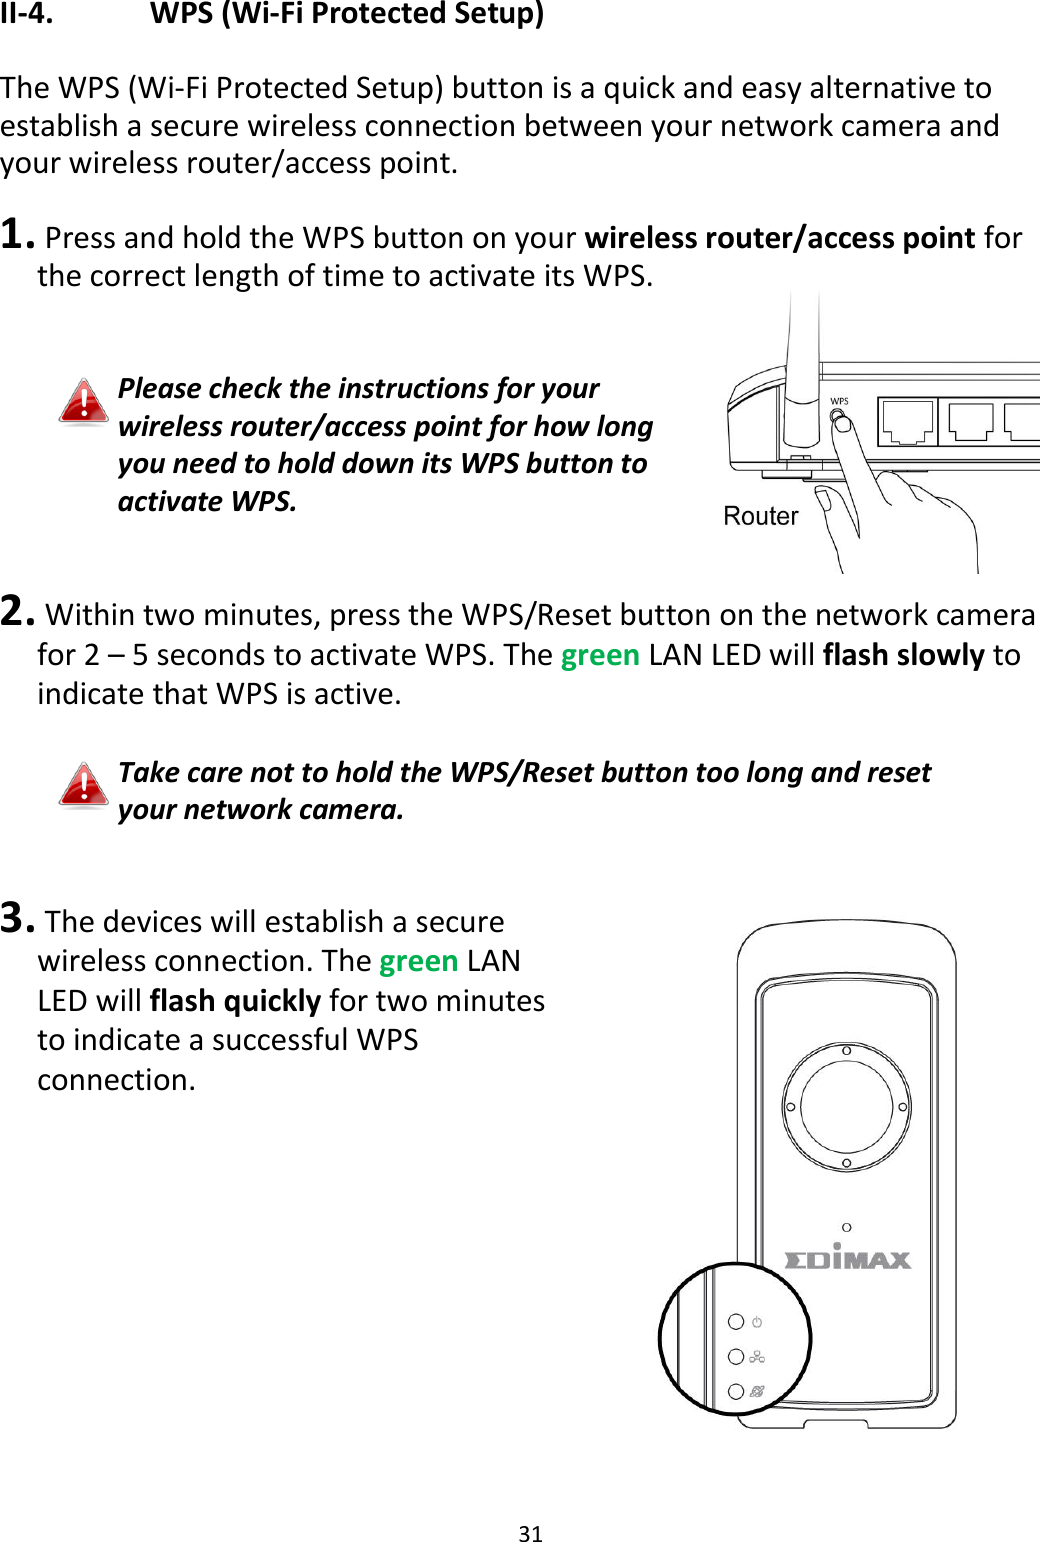 31  II-4.    WPS (Wi-Fi Protected Setup)  The WPS (Wi-Fi Protected Setup) button is a quick and easy alternative to establish a secure wireless connection between your network camera and your wireless router/access point.   1.  Press and hold the WPS button on your wireless router/access point for the correct length of time to activate its WPS.   Please check the instructions for your wireless router/access point for how long you need to hold down its WPS button to activate WPS.   2.  Within two minutes, press the WPS/Reset button on the network camera for 2 – 5 seconds to activate WPS. The green LAN LED will flash slowly to indicate that WPS is active.  Take care not to hold the WPS/Reset button too long and reset your network camera.   3.  The devices will establish a secure wireless connection. The green LAN LED will flash quickly for two minutes to indicate a successful WPS connection.   